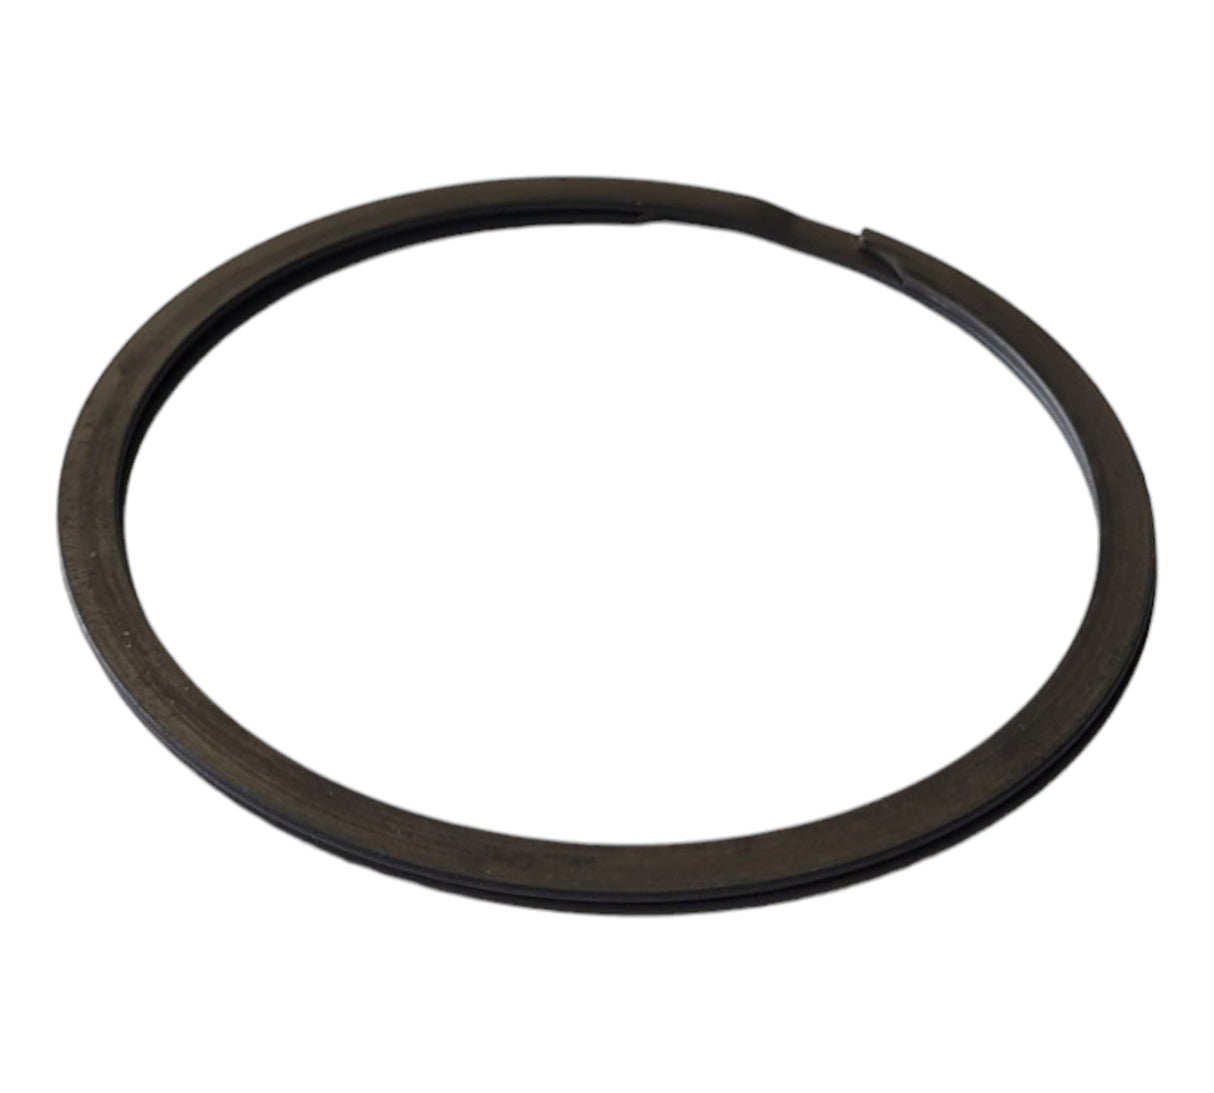 Hammer Union Retaining Ring, Two Turn Spring, 2" 1502 Segment and NPS Union